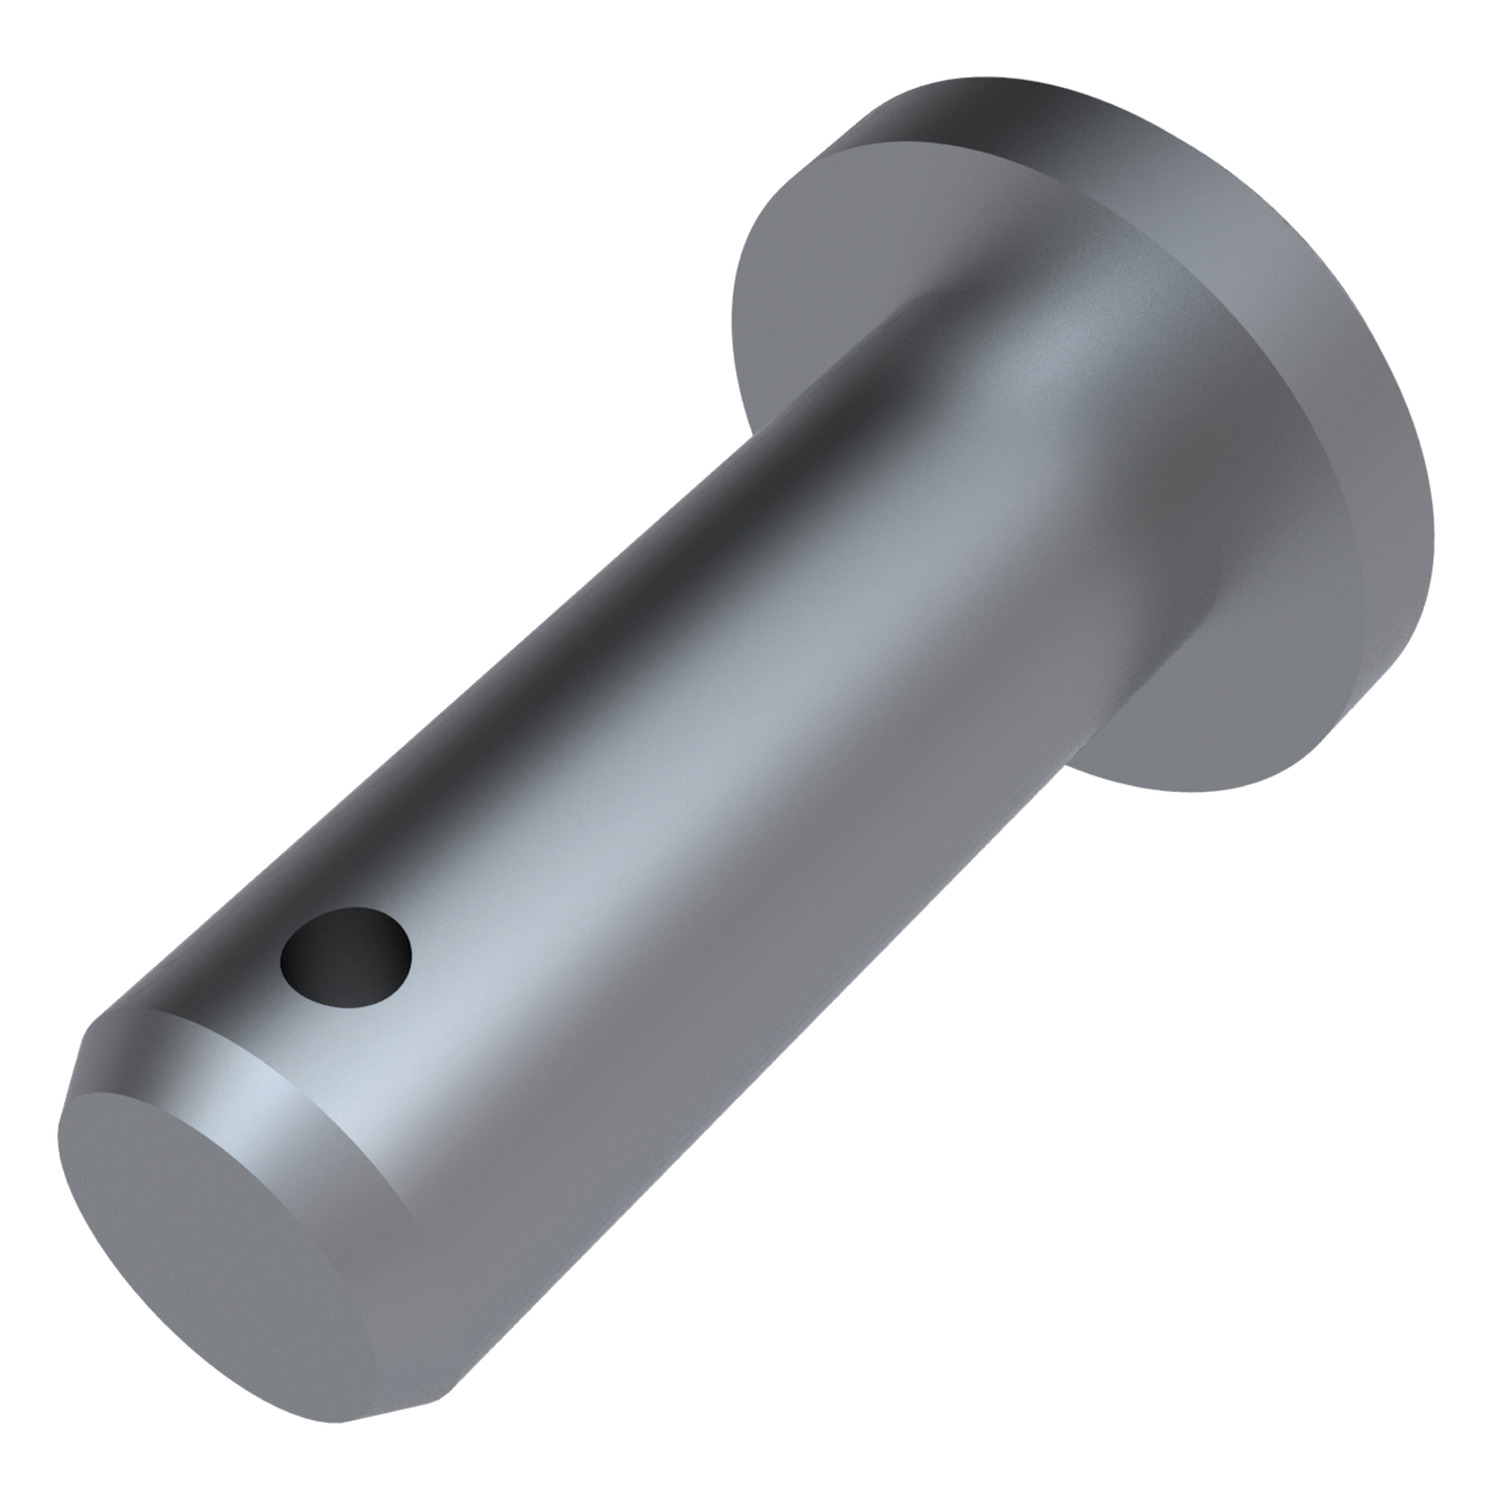 Stainless Clevis Pin With Hole Stainless steel clevis pins with hole. Designed for use with clevis joints.